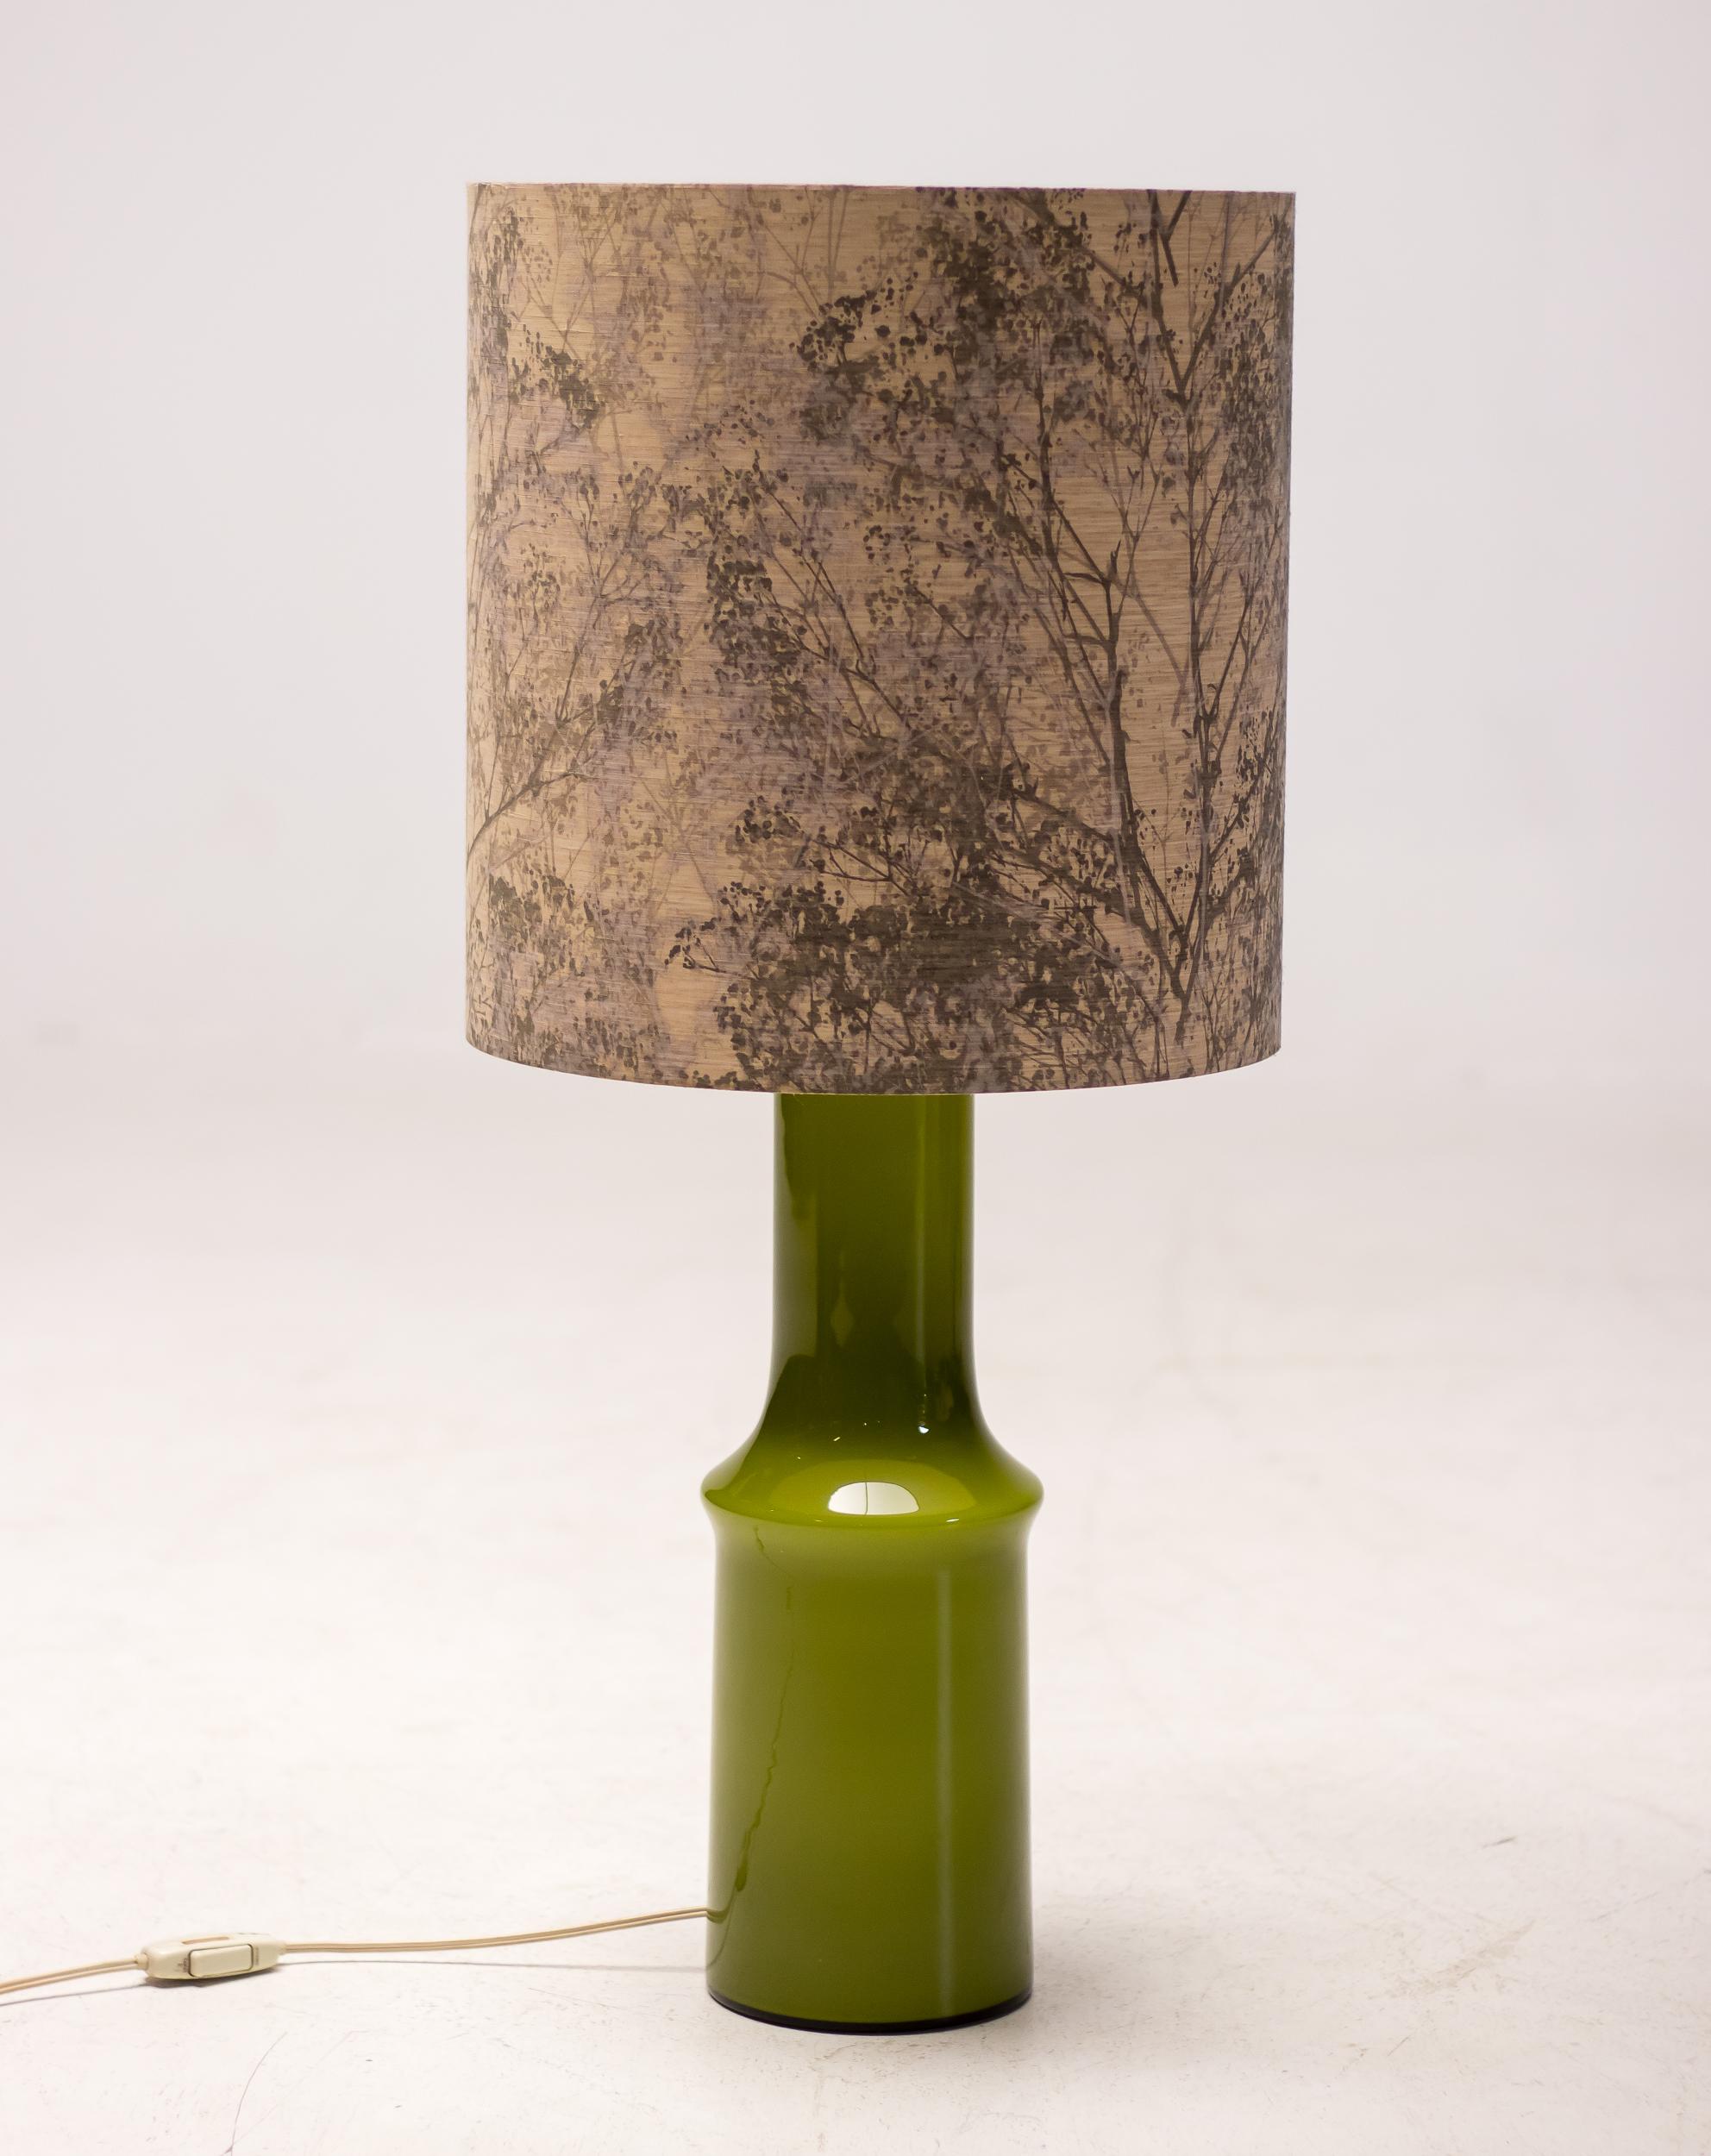 Beautiful large green glass table lamp by Holmegaard, Denmark.
The shade is easily replaceable, but it is in good condition and has a charming nature decoration.
The base is in excellent condition and it is wired for use in the USA.